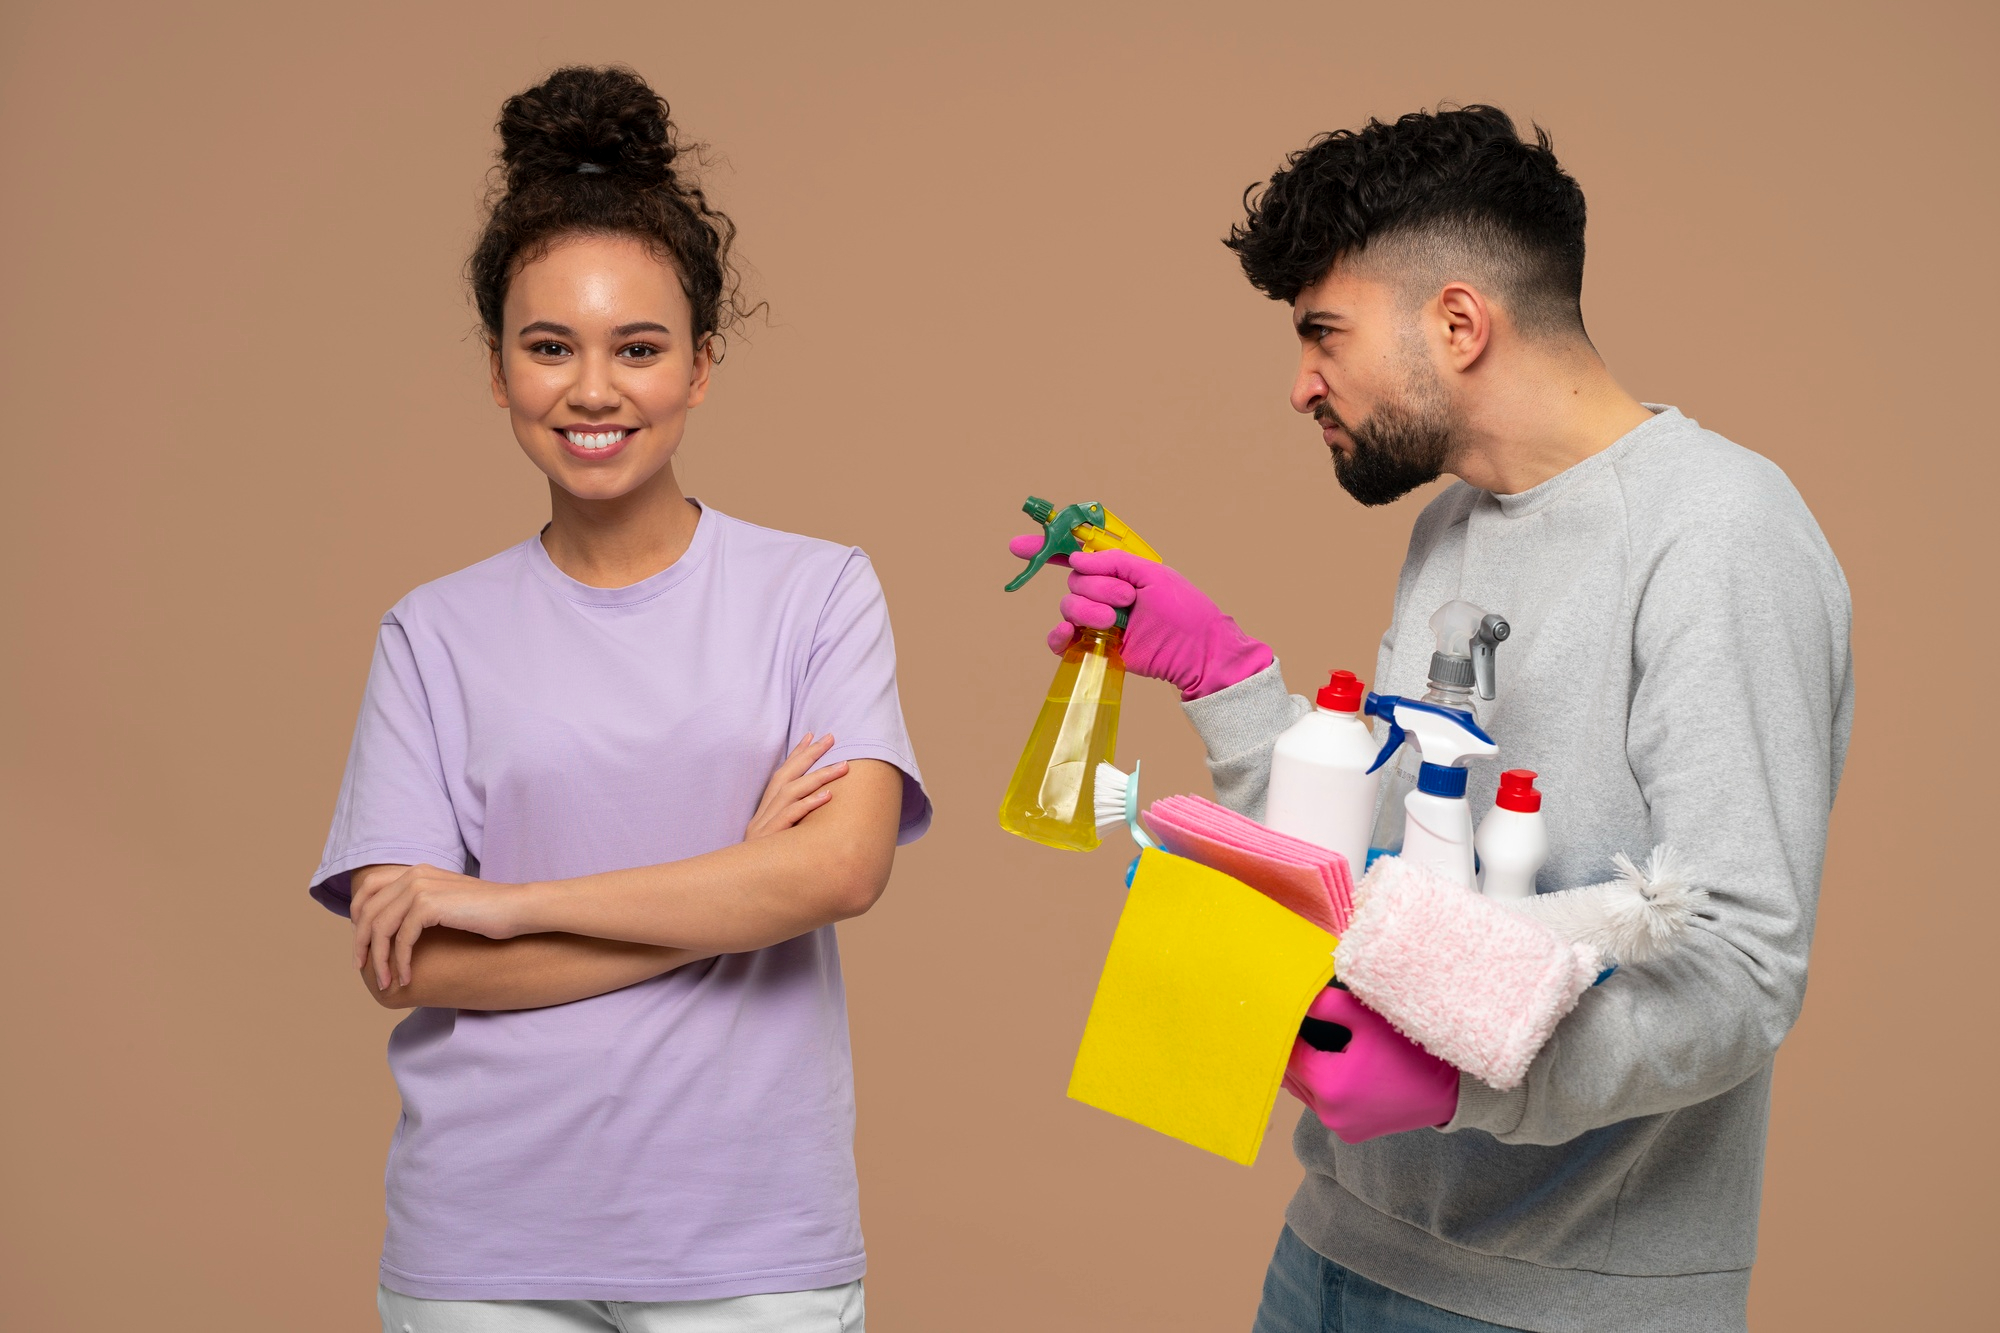 A woman smiling while a man playfully holds cleaning materials | Source: Freepik